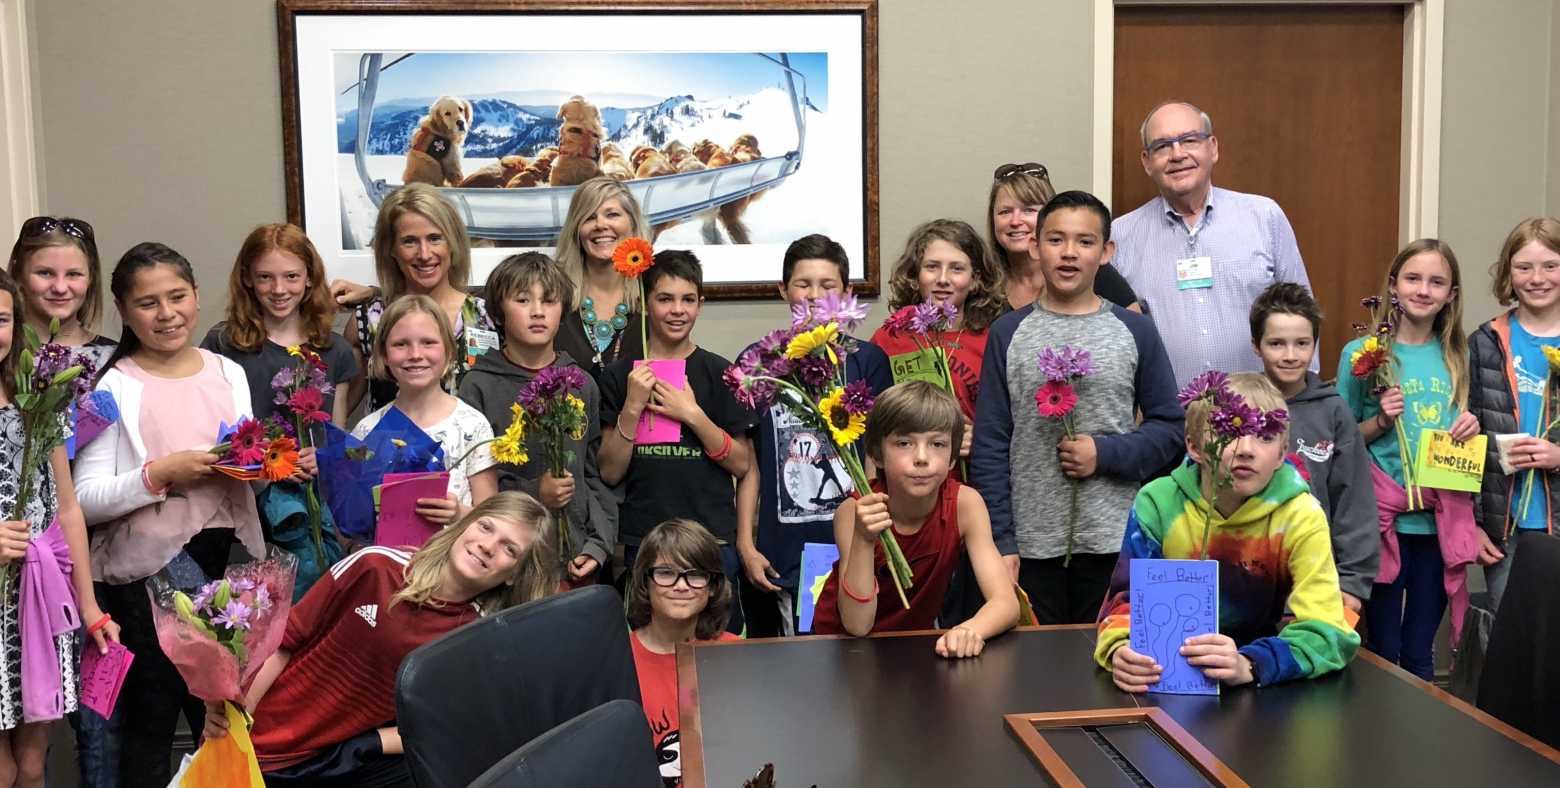 Forth and Fifth Graders from Sierra Expeditionary Learning School, joined by their teacher Lynn Akers, Gene Upshaw Memorial Tahoe Forest Cancer Center Director Jim McKenna, Operations Manger Rebecca Zadig-Escalera and Executive Director of Tahoe Forest Health System Foundation Martha Simon